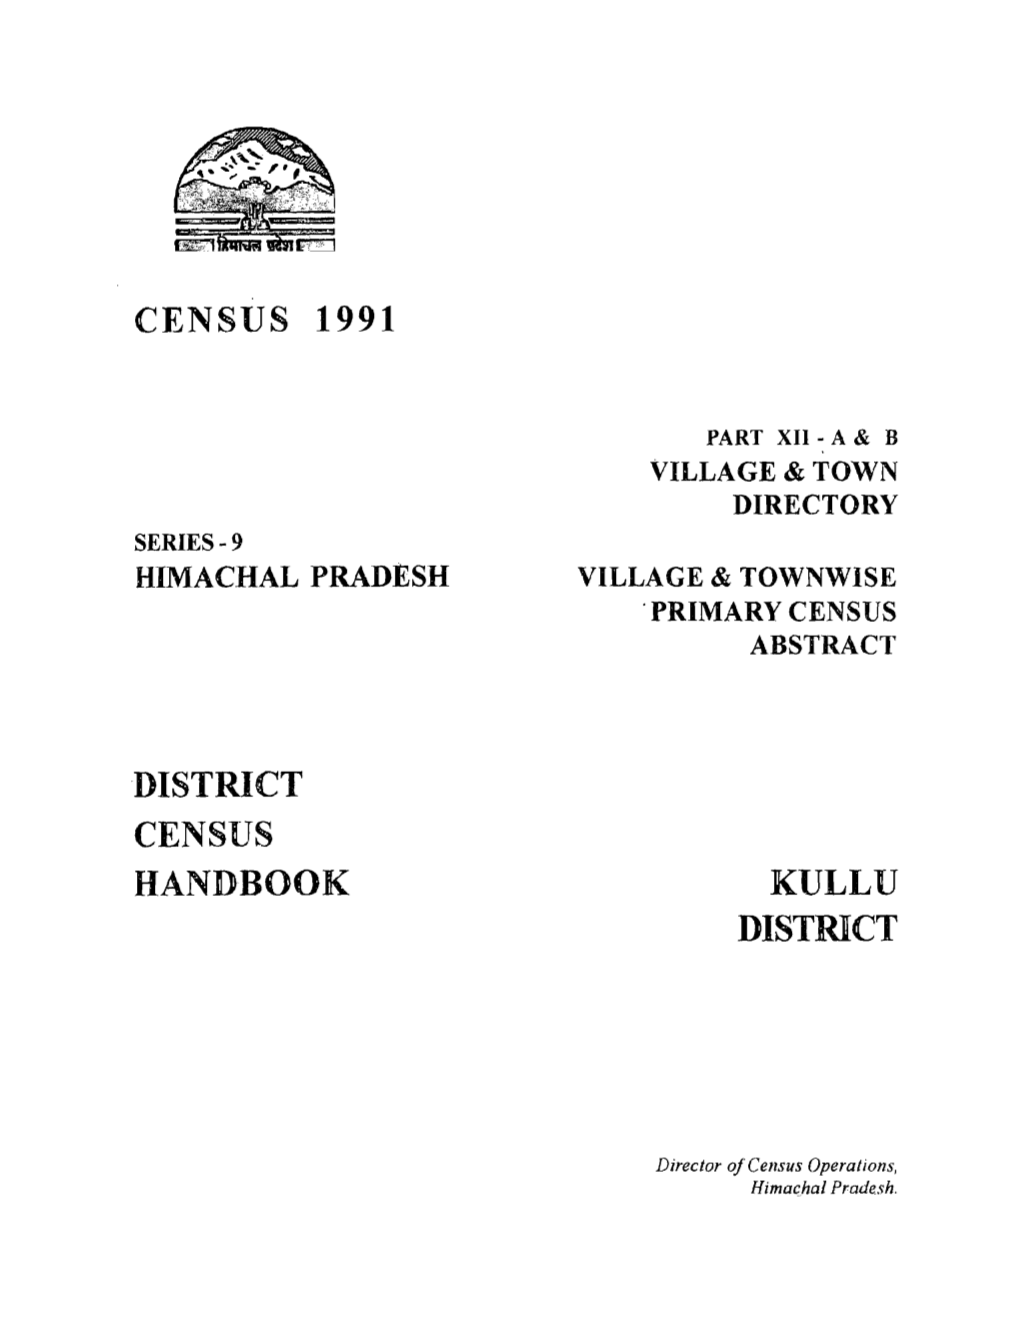 Villages & Townwise Primary Census Abstract, Kullu , Part-XII-A & B